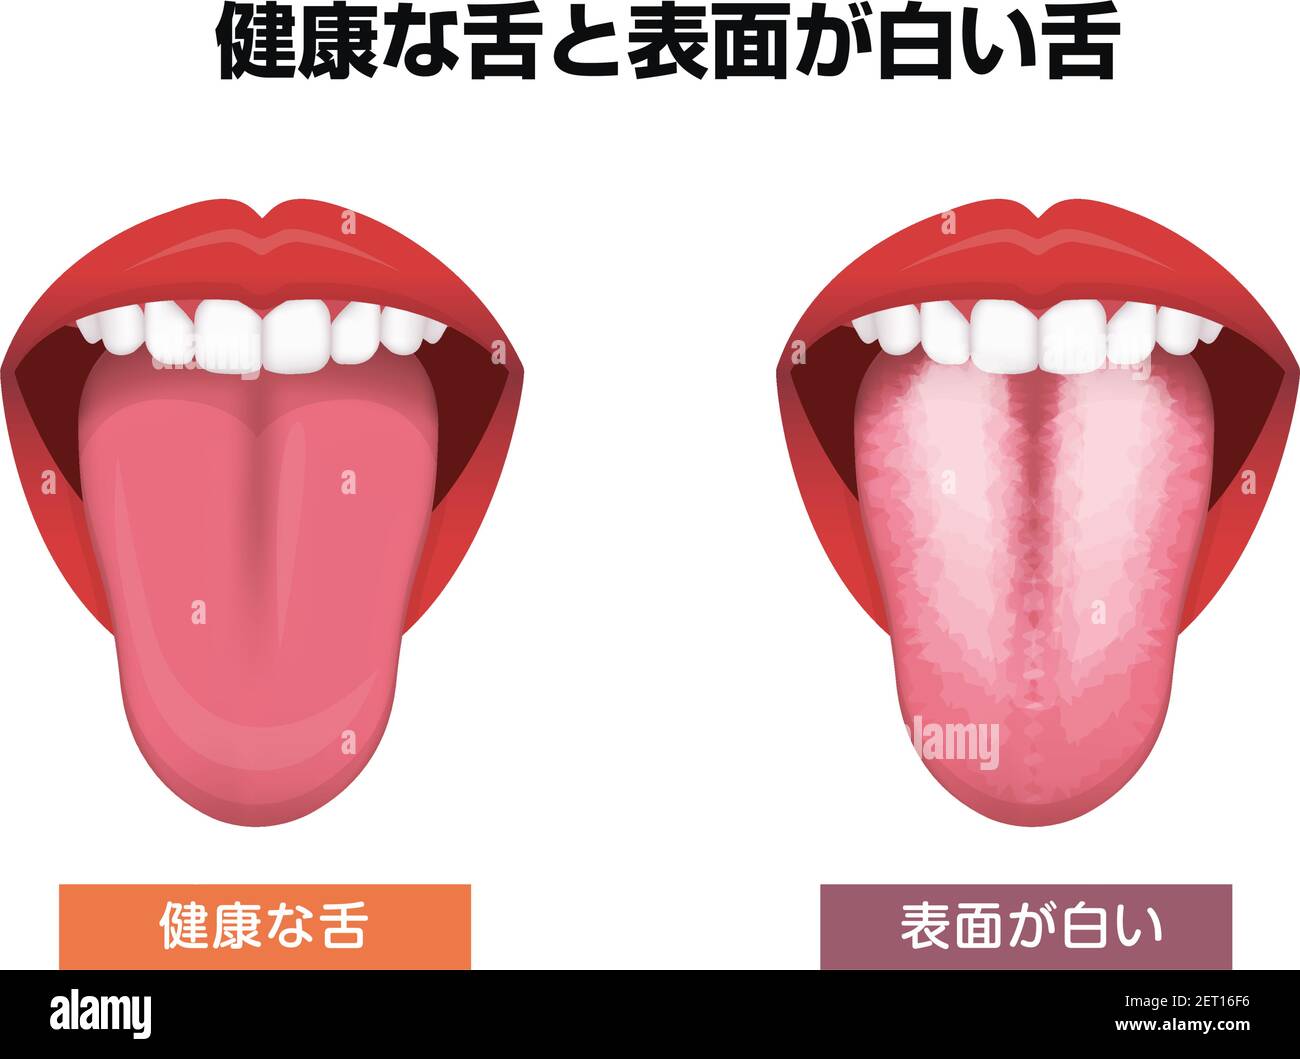 Tongue’s health sign vector illustration ( White coated tongue ) Stock Vector